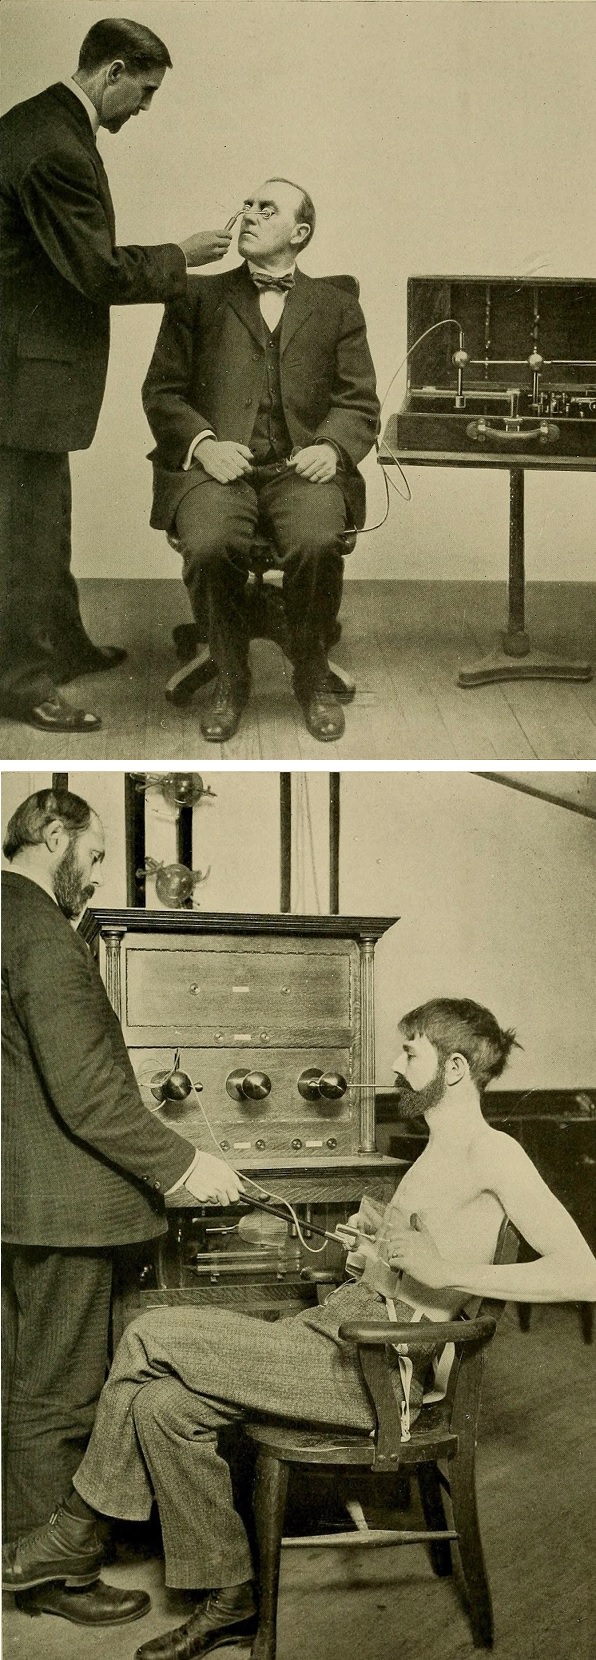 High frequency electric currents in medicine and dentistry from the early 20th century.